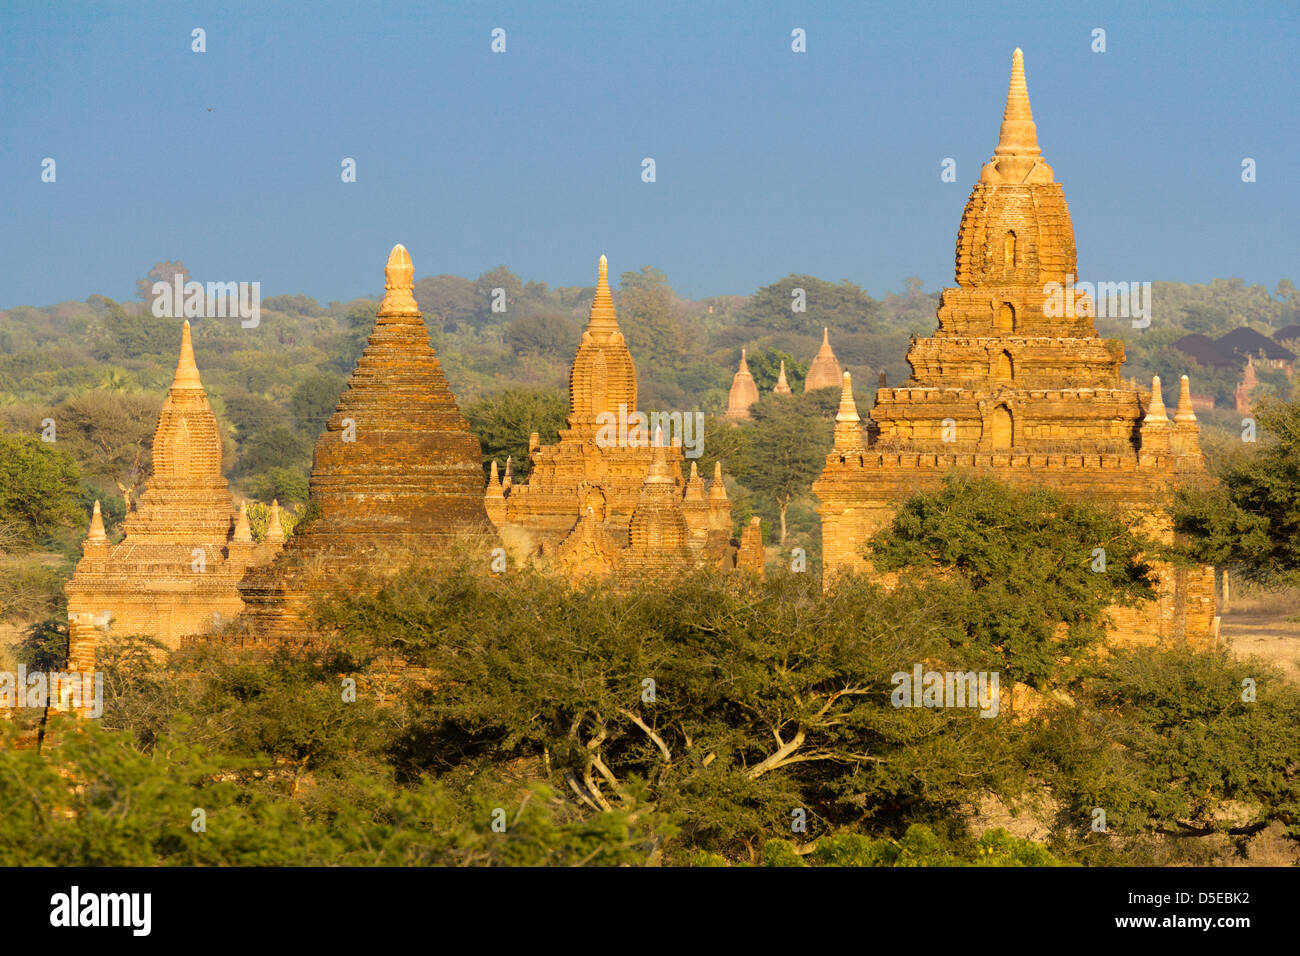 The Temples and Pagodas of Bagan, Myanmar - early morning 10 Stock Photo